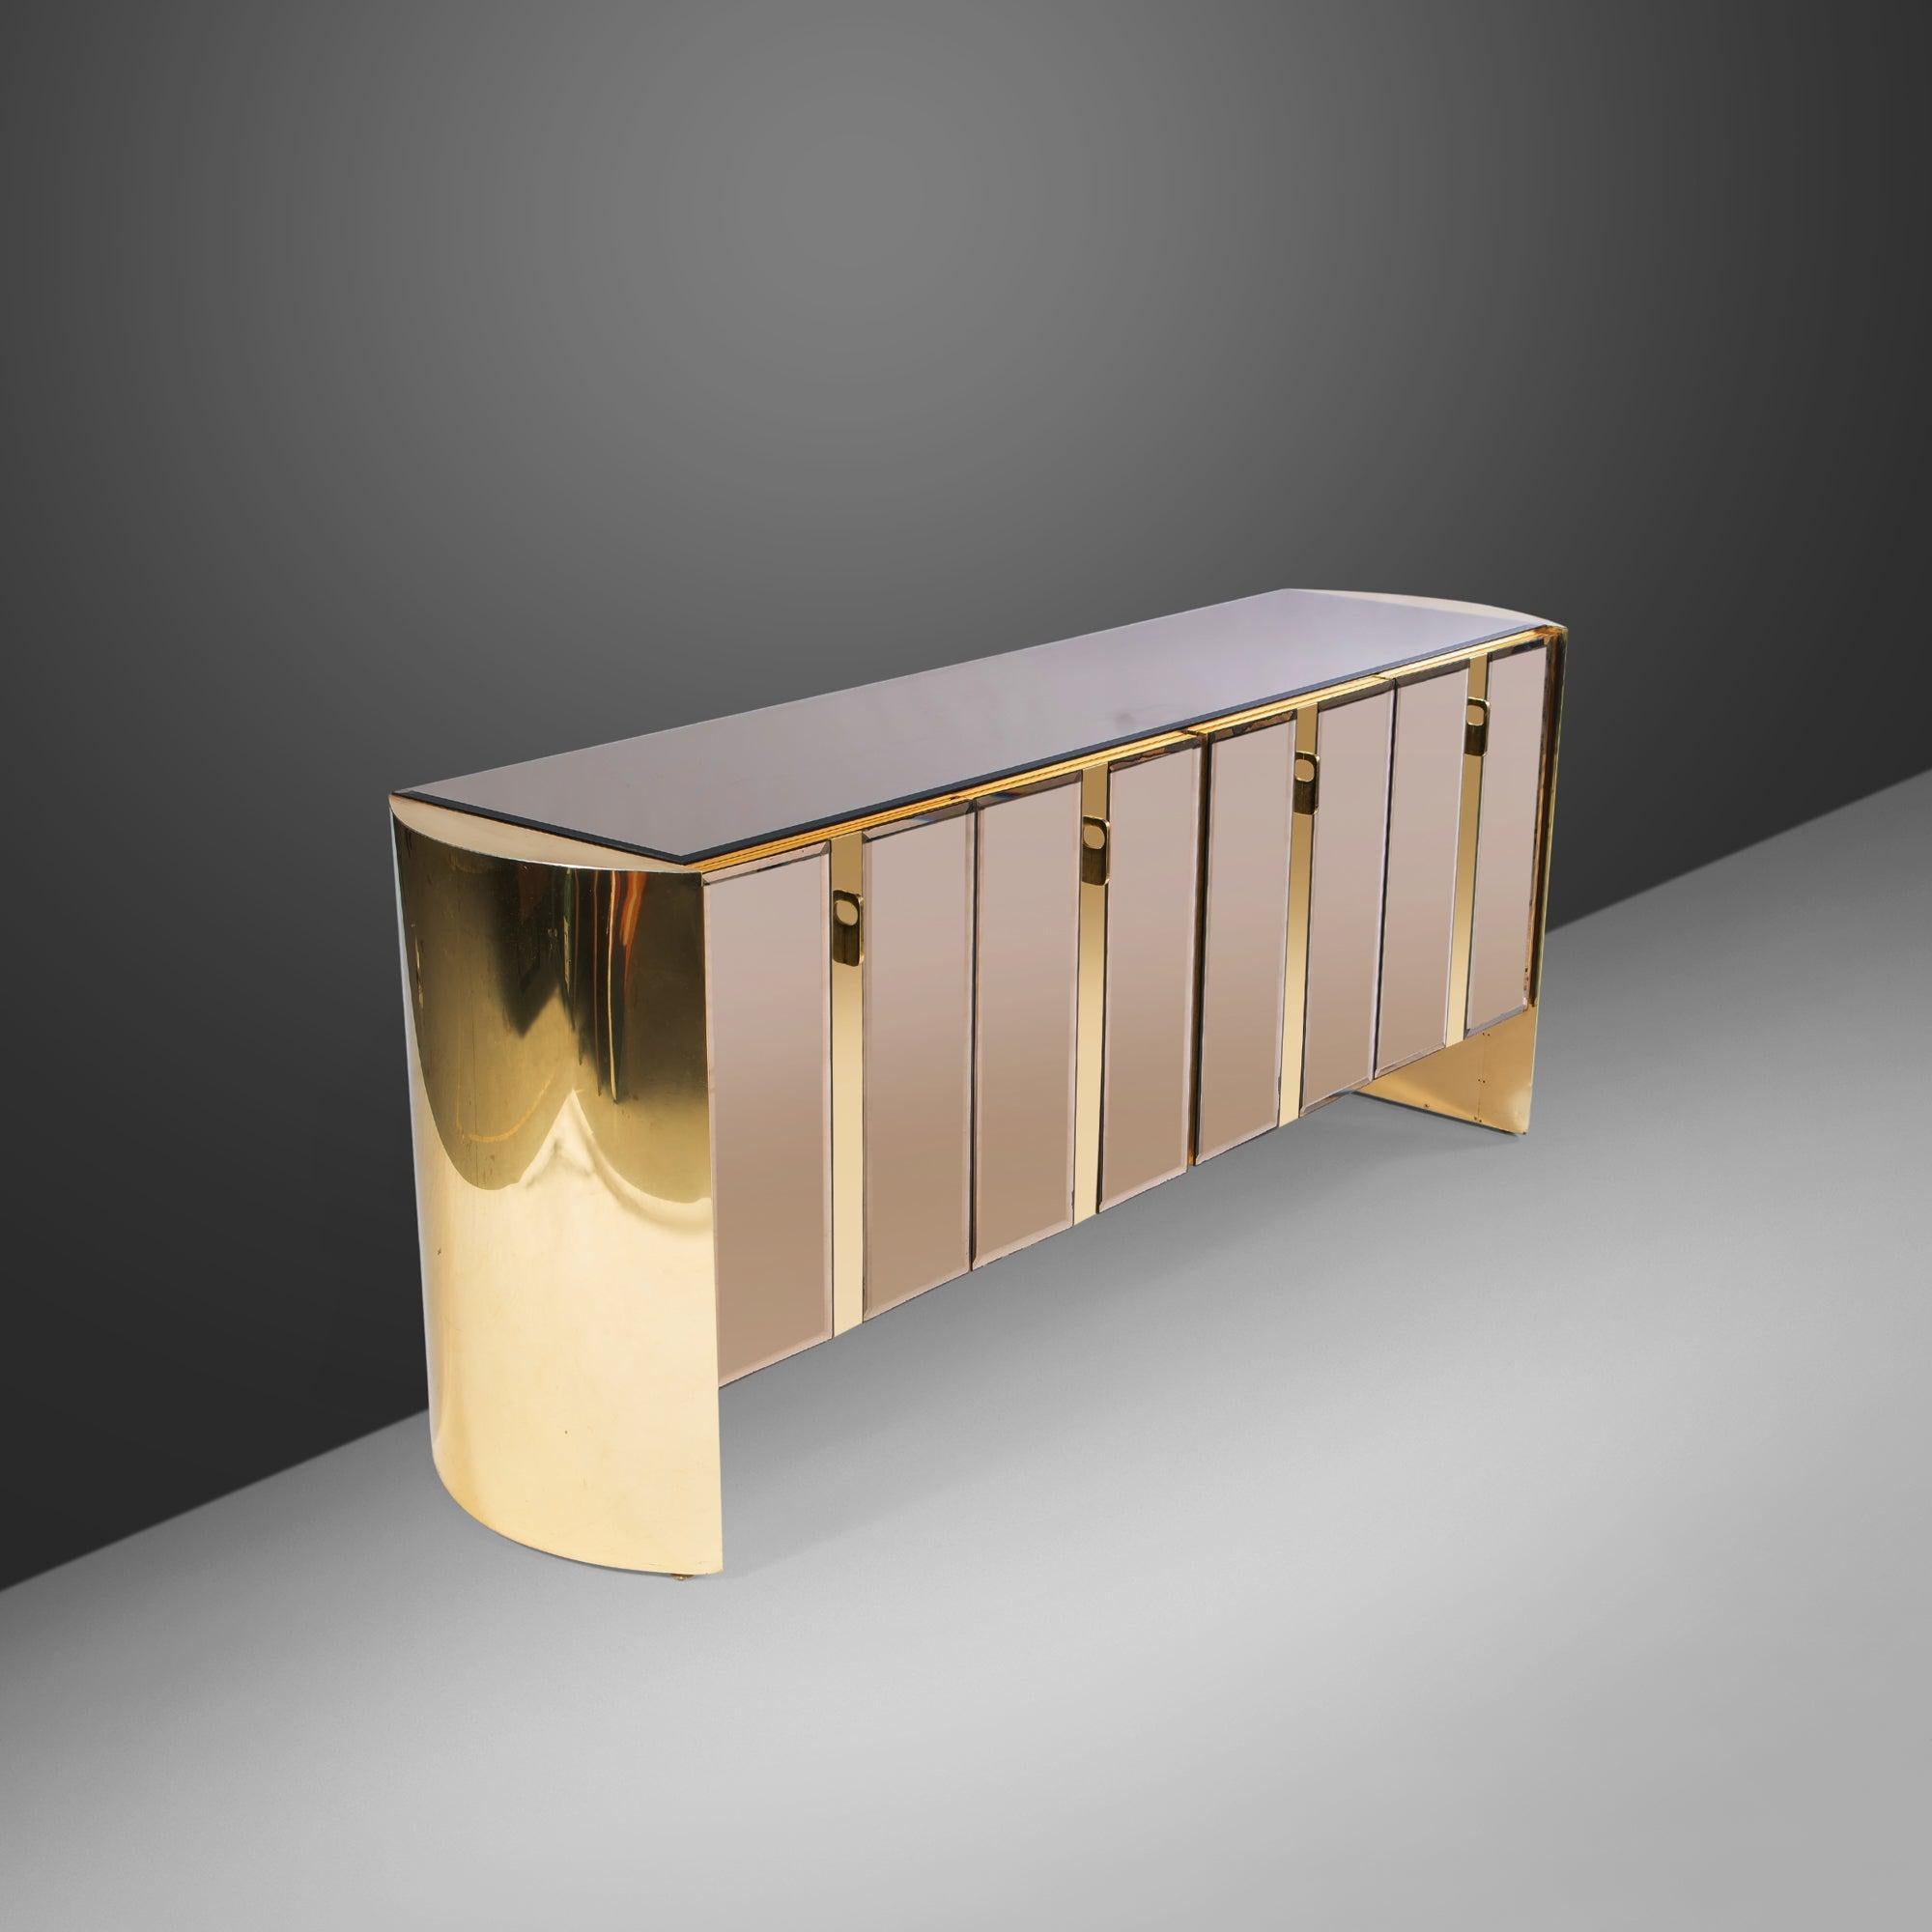 American Ello Mirrored Case Piece / Credenza with Brass Accents, 1980s For Sale